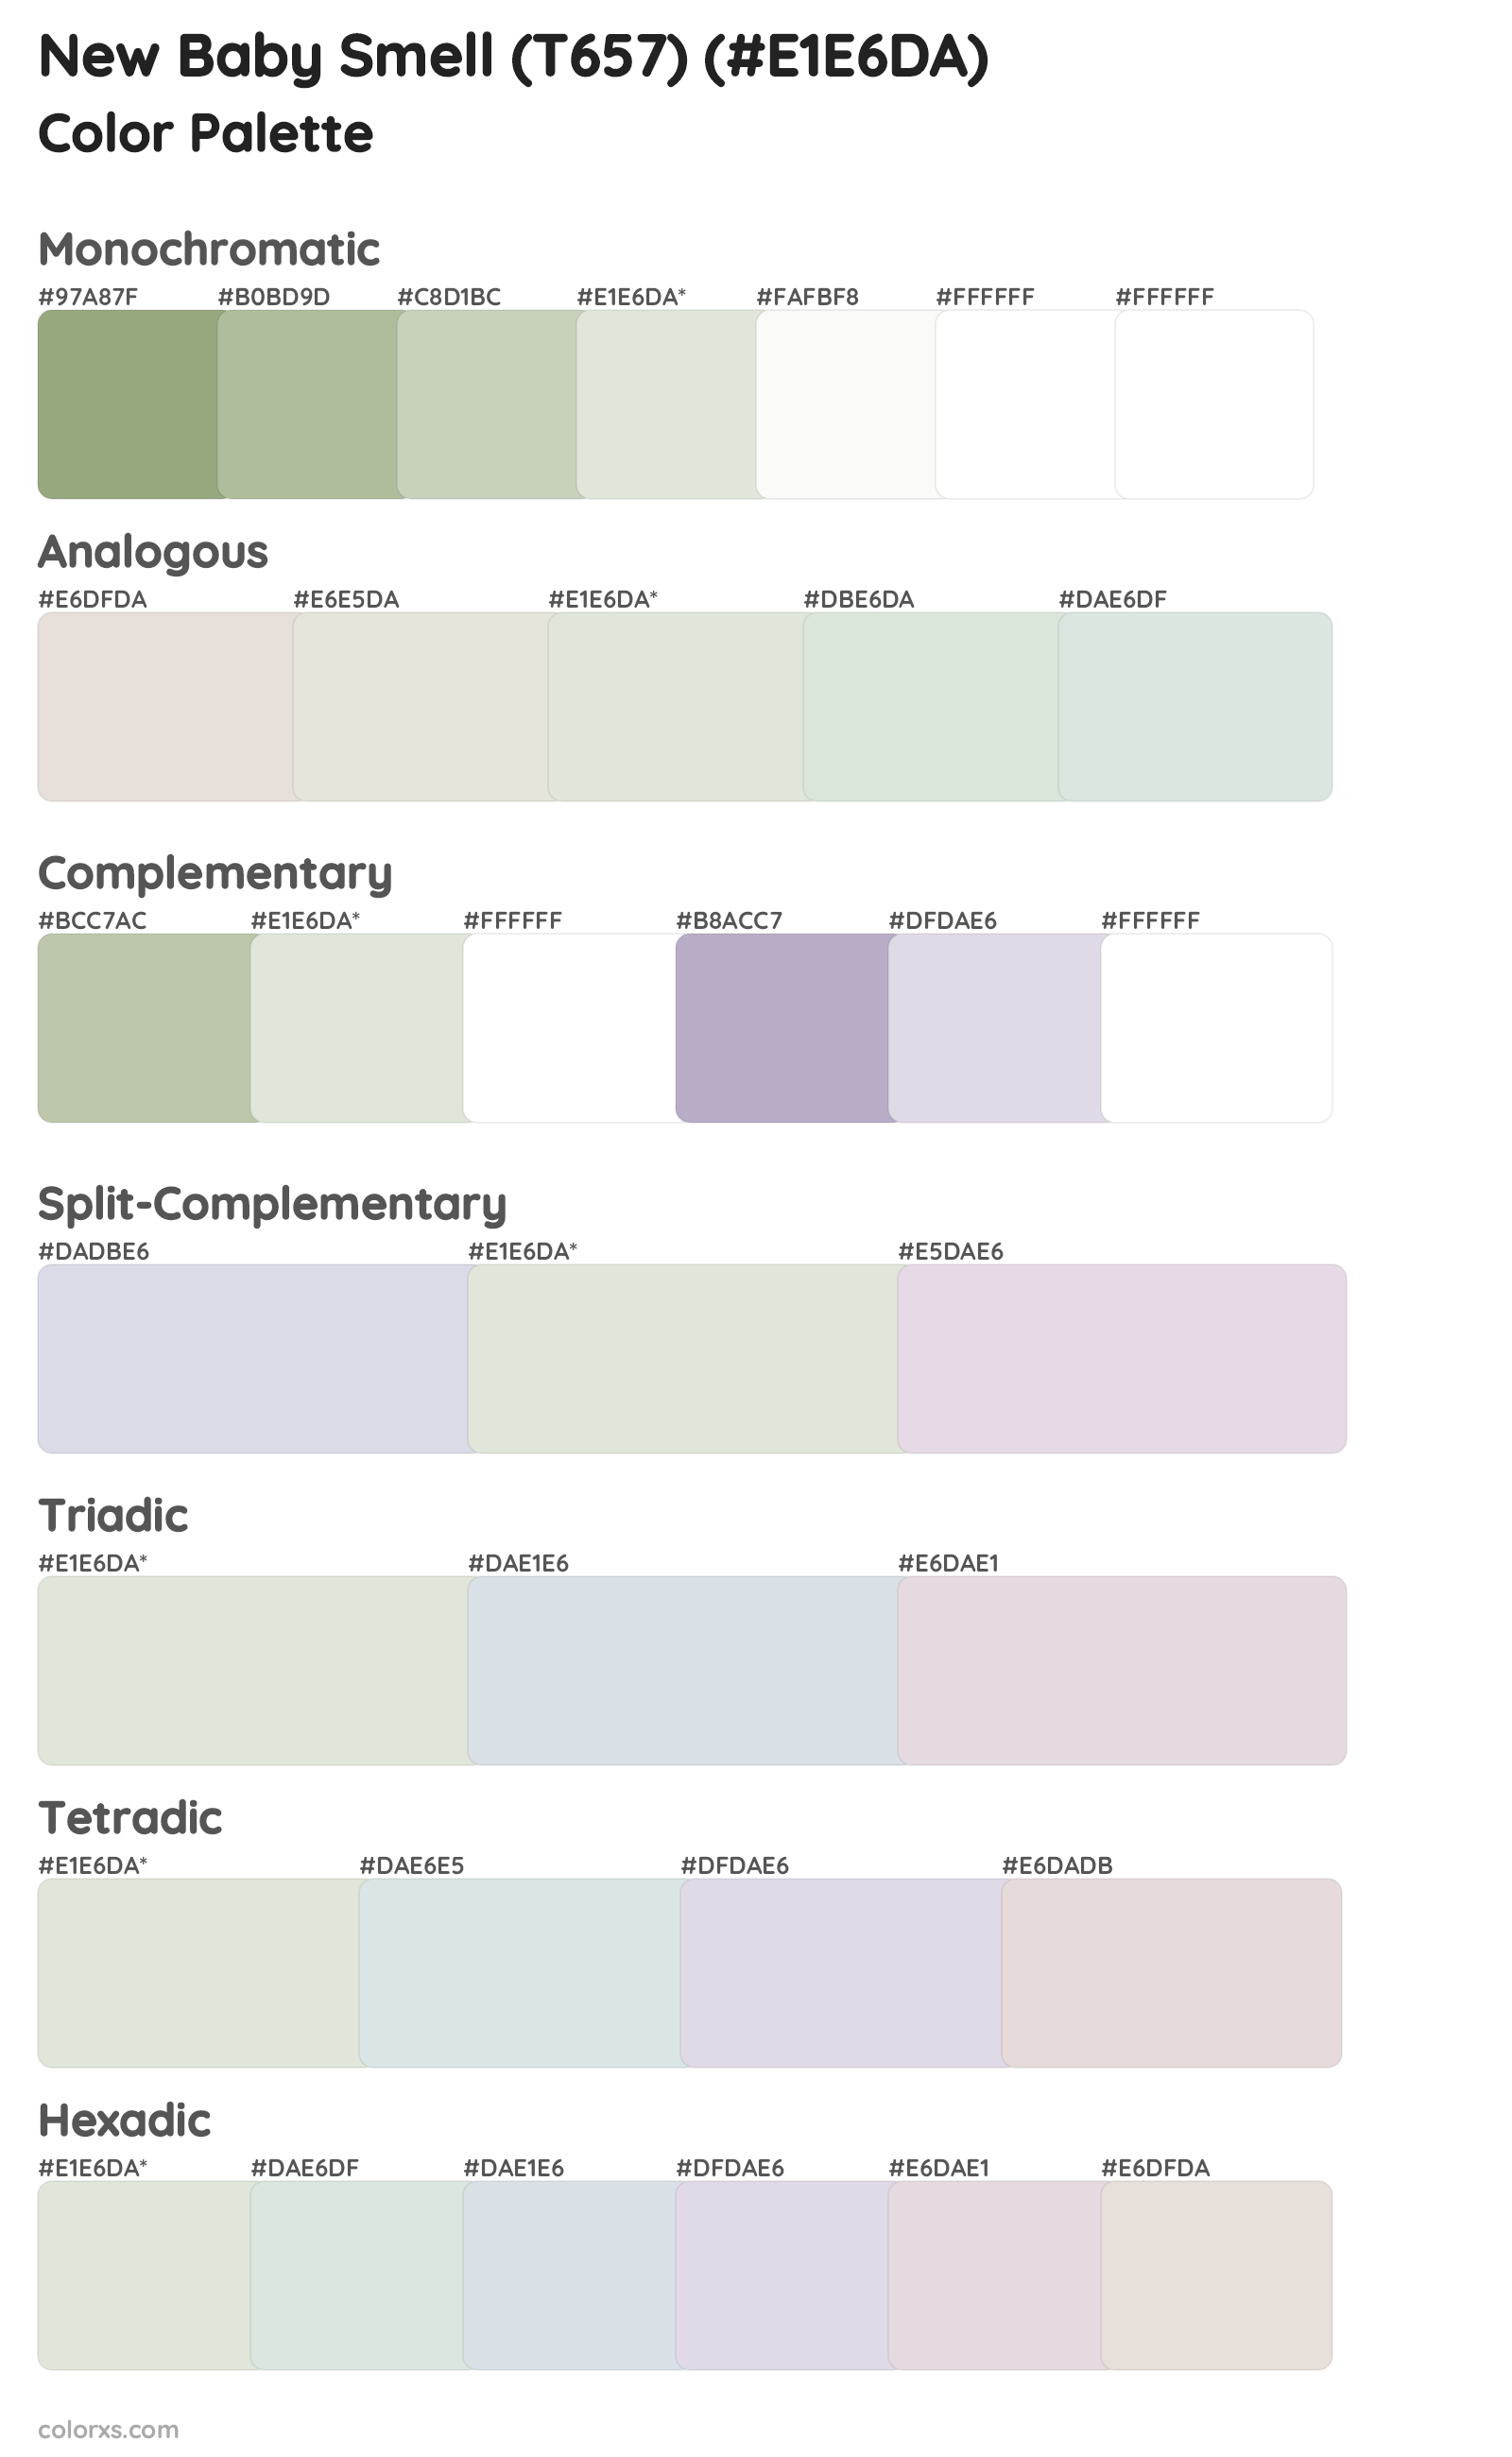 New Baby Smell (T657) Color Scheme Palettes